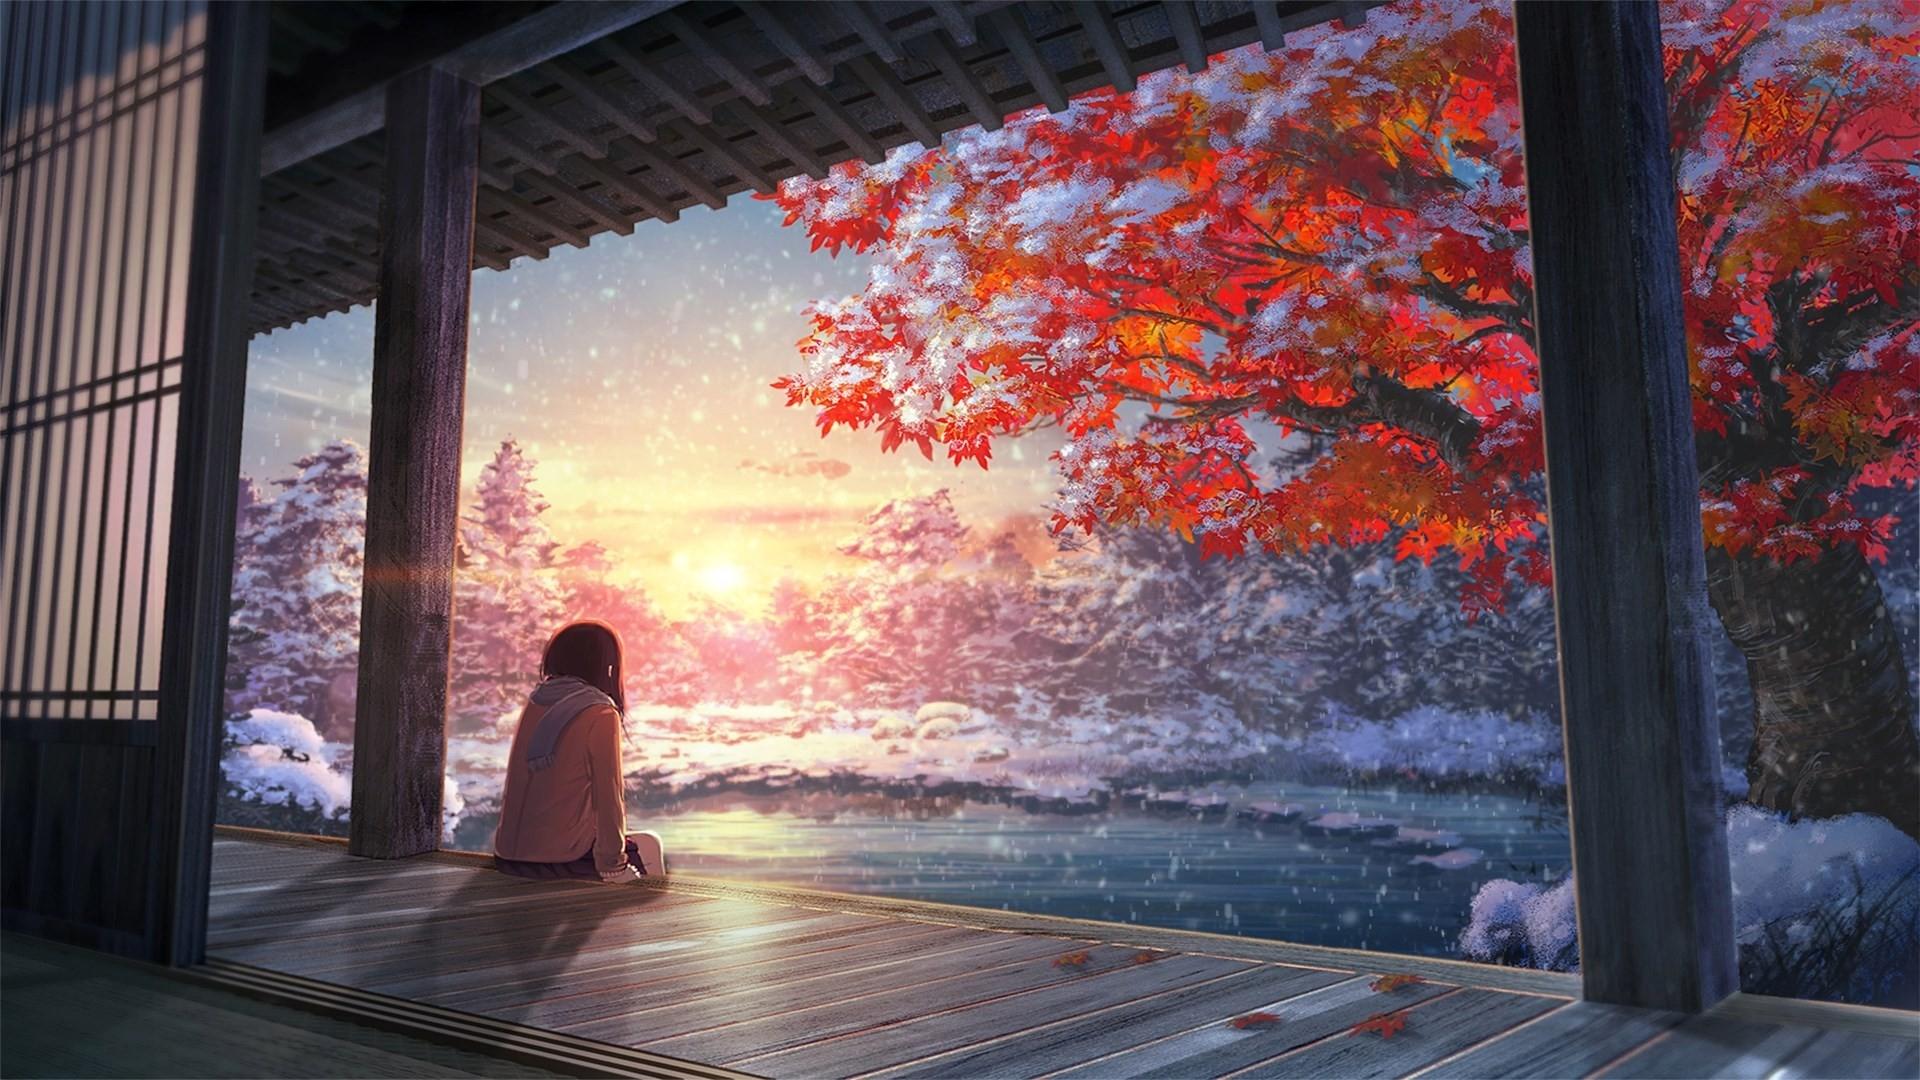 260+ Anime Landscape HD Wallpapers and Backgrounds, anime 1080p